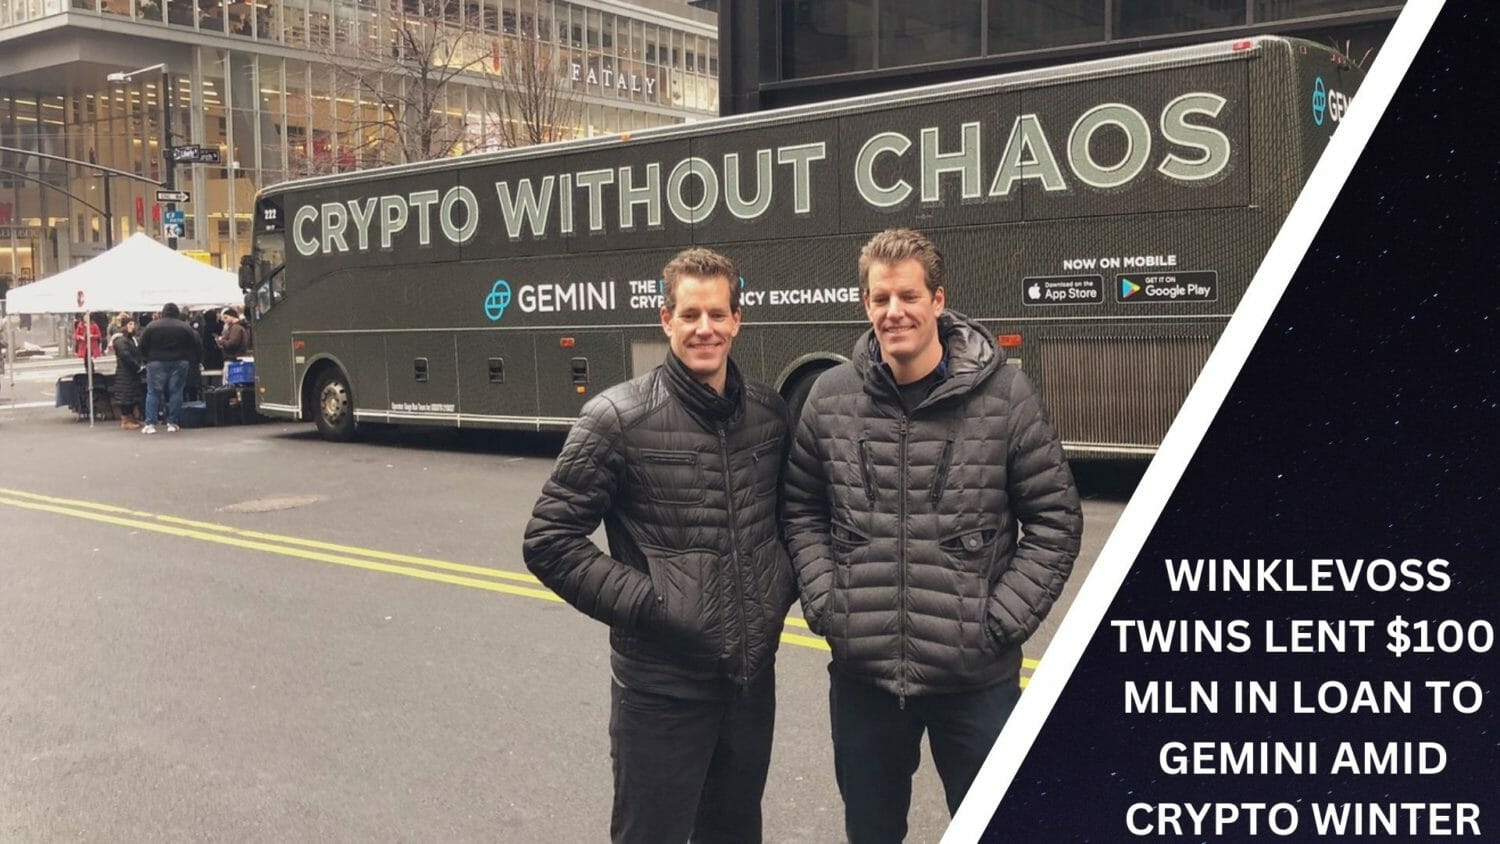 Winklevoss Brothers Lent $100 Mln In Loan To Gemini Amid Crypto Winter